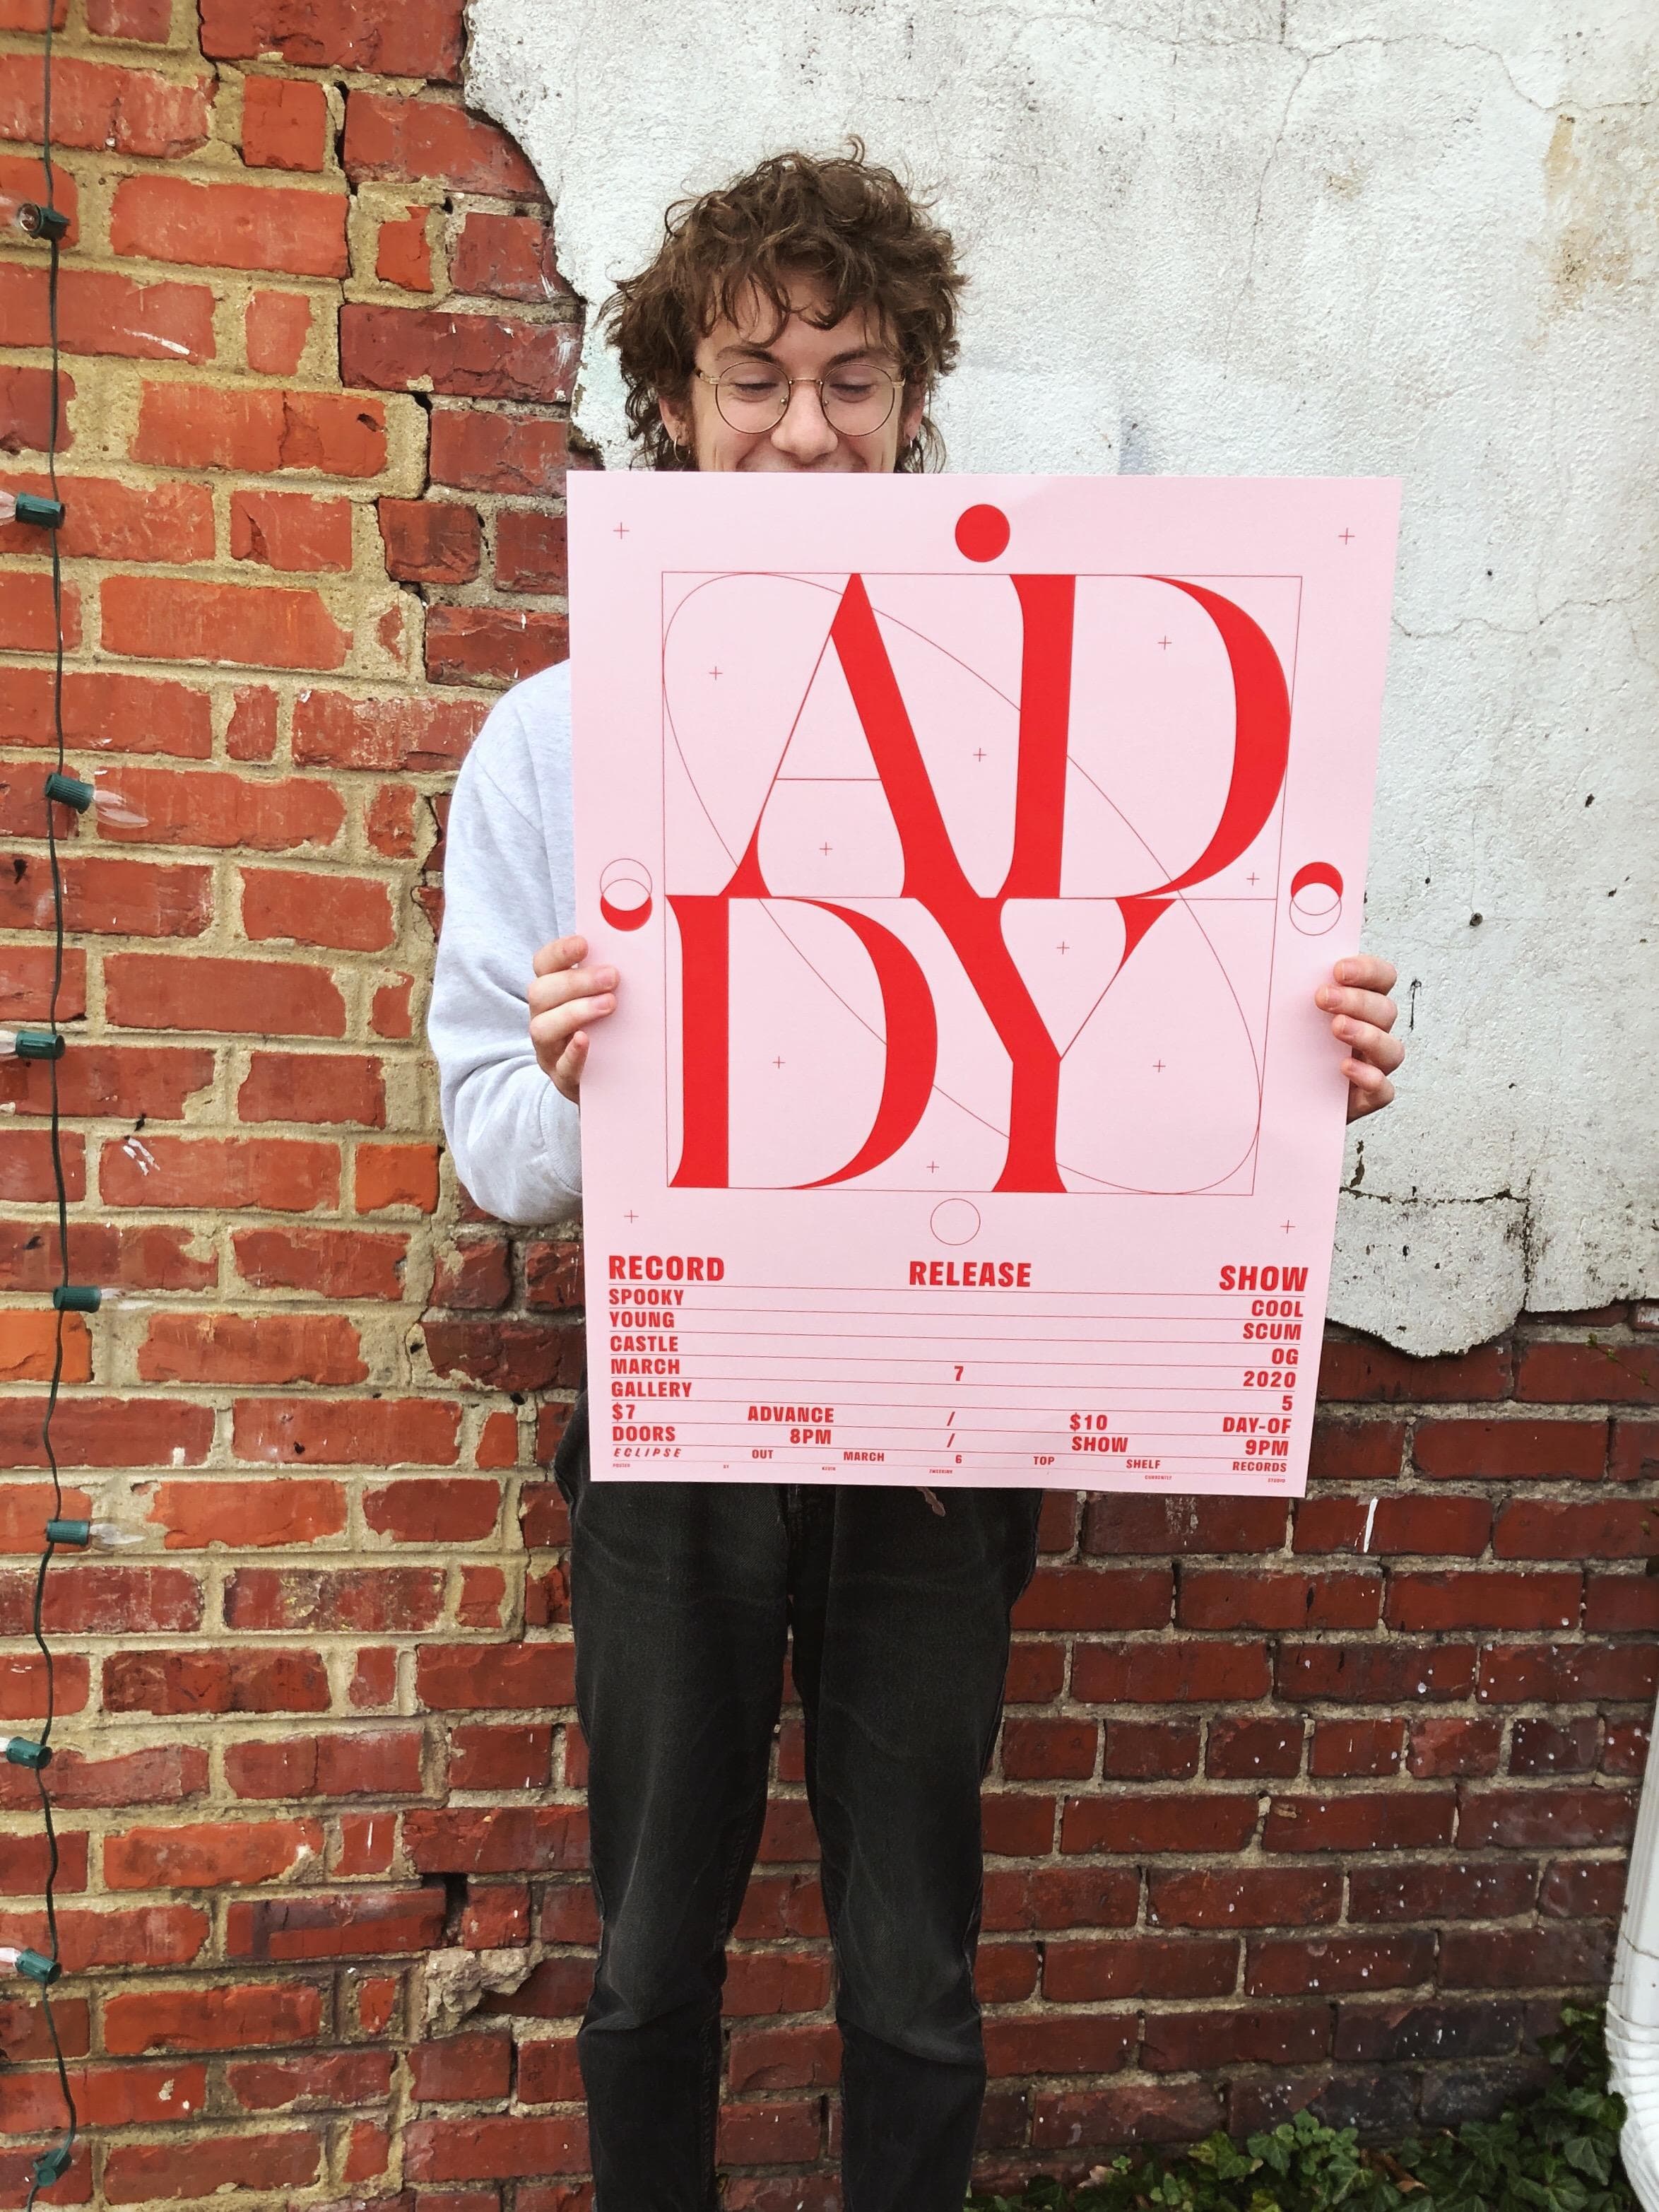 Addy holding the poster for their record release show